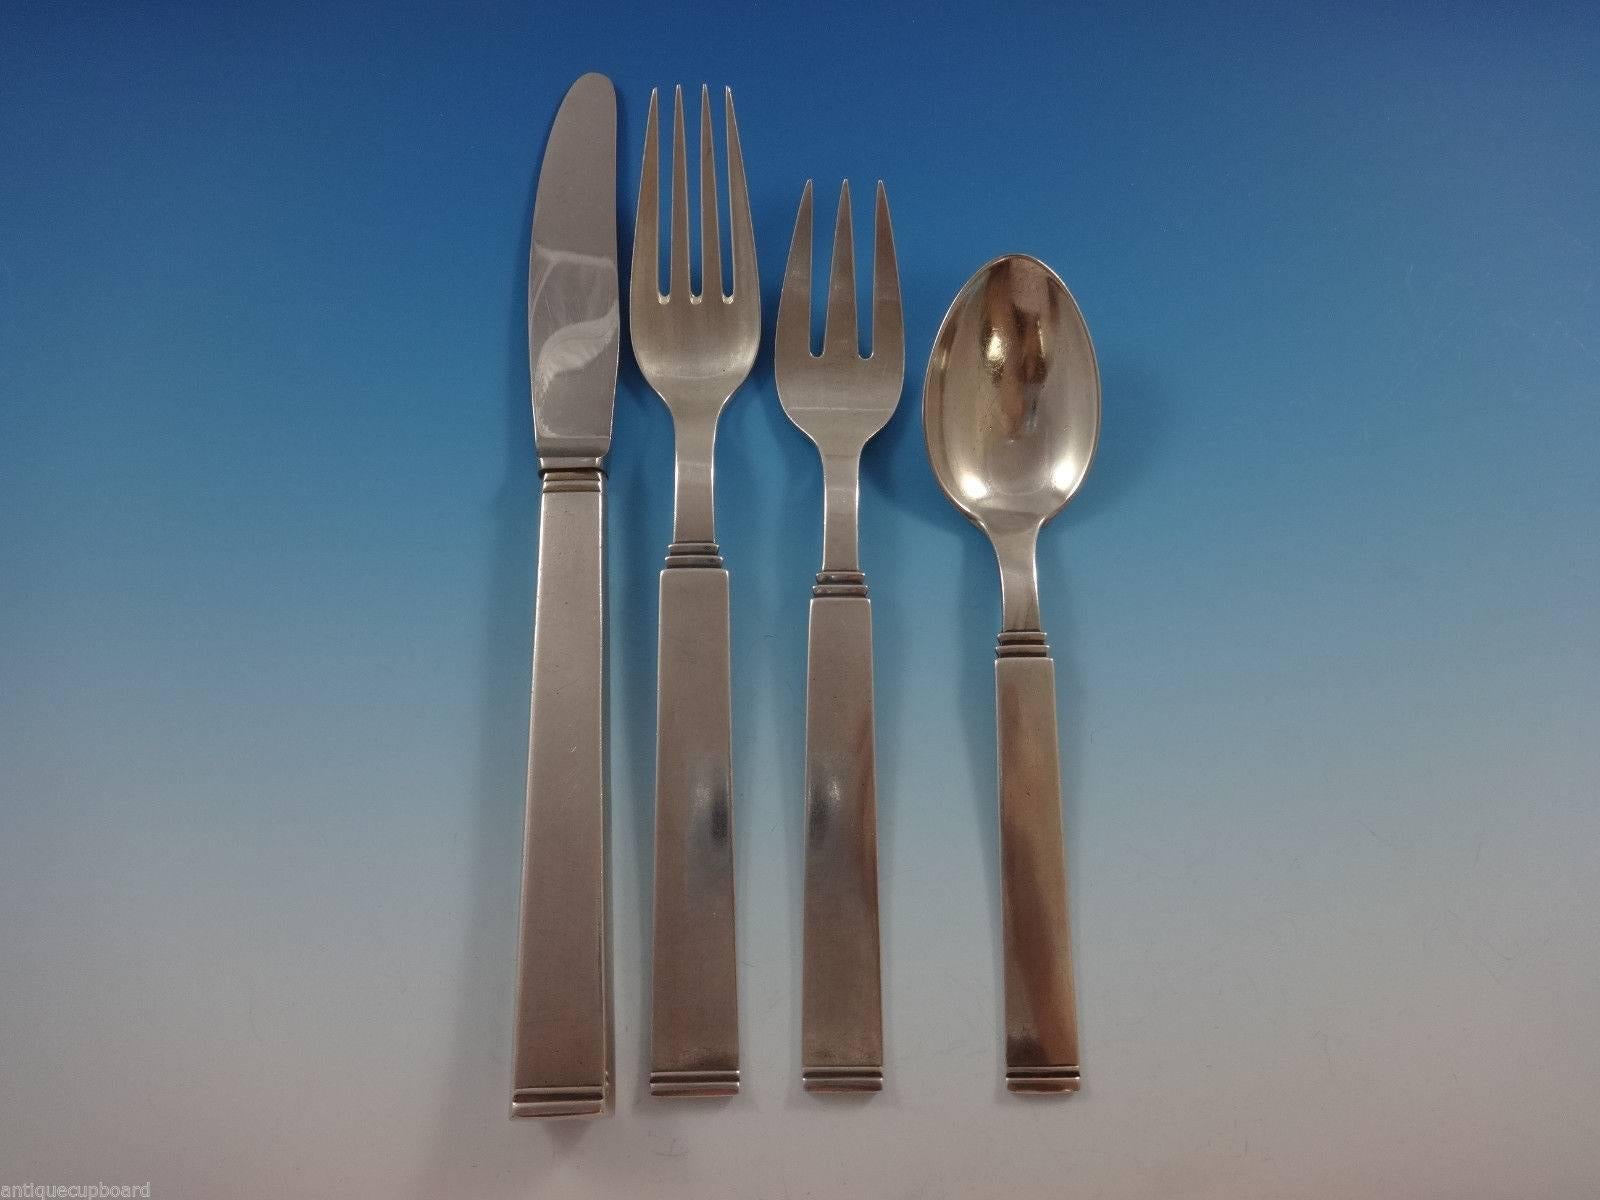 Fabulous Funkis III by W.S. Sorensen Danish sterling silver flatware set of 75 pieces. This set includes:

12 knives, 8